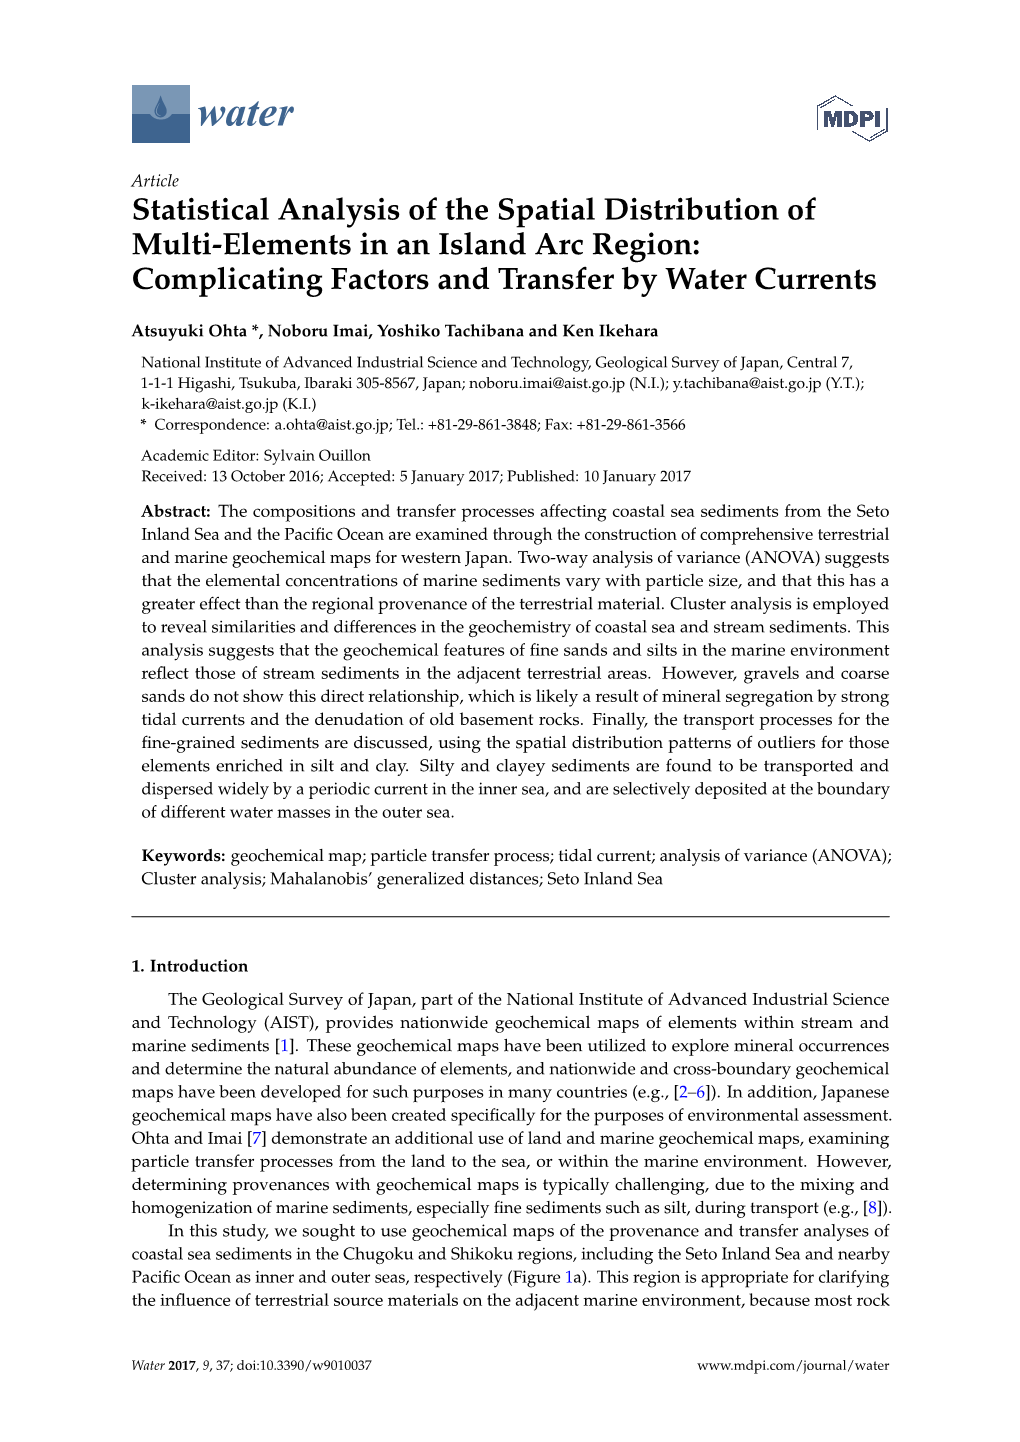 Statistical Analysis of the Spatial Distribution of Multi-Elements in an Island Arc Region: Complicating Factors and Transfer by Water Currents